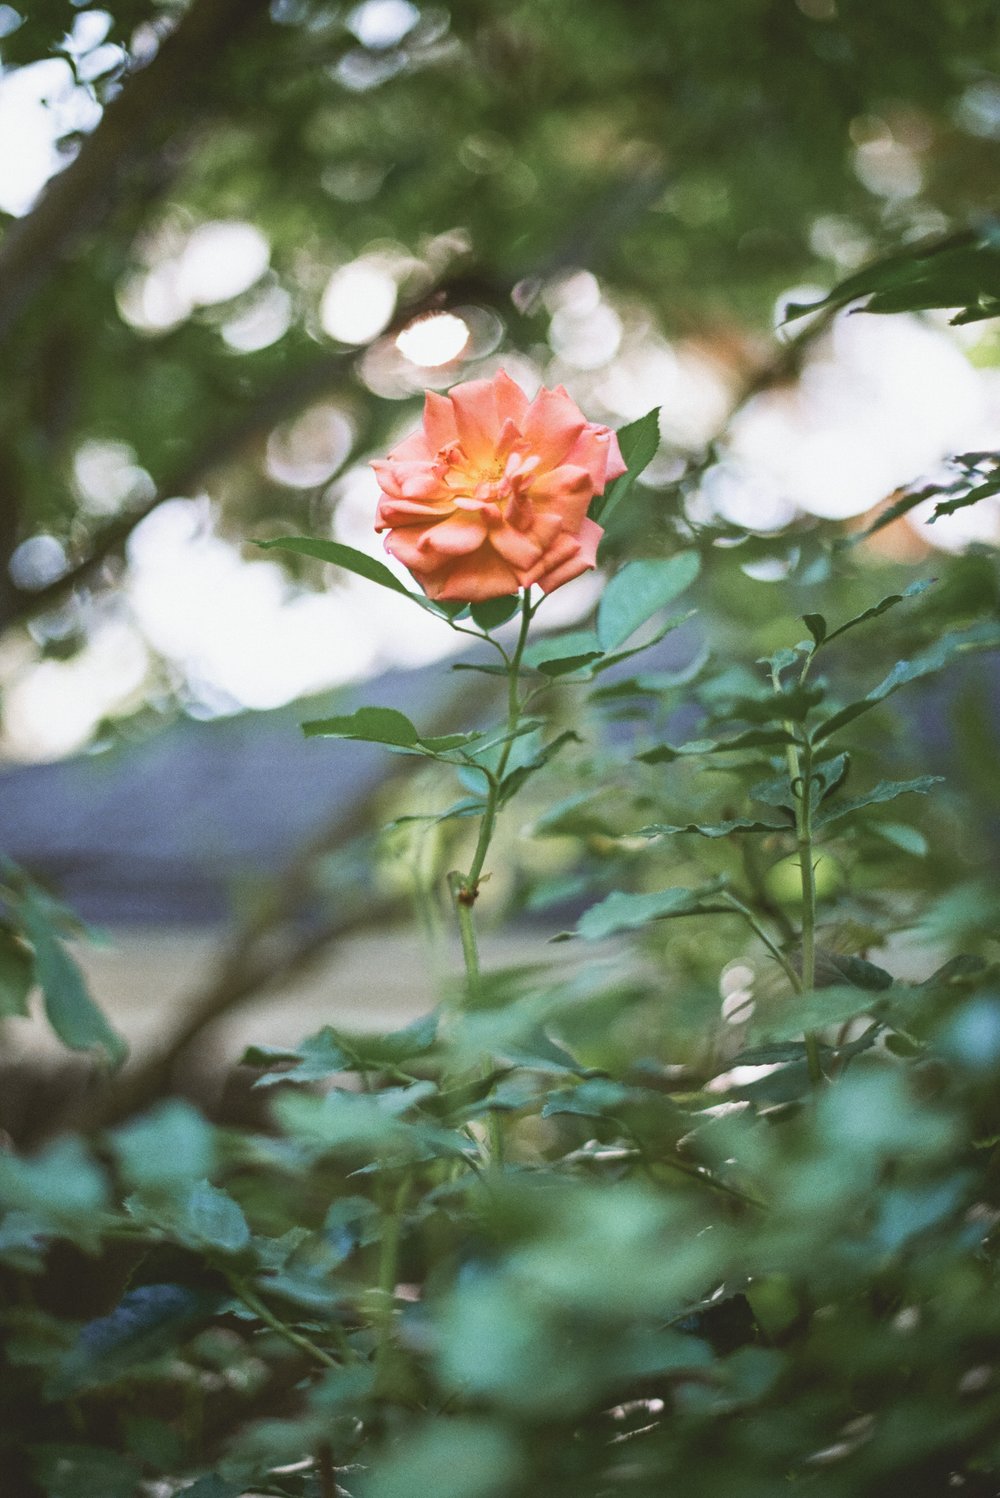 color film photo of peach rose blooming in greenery